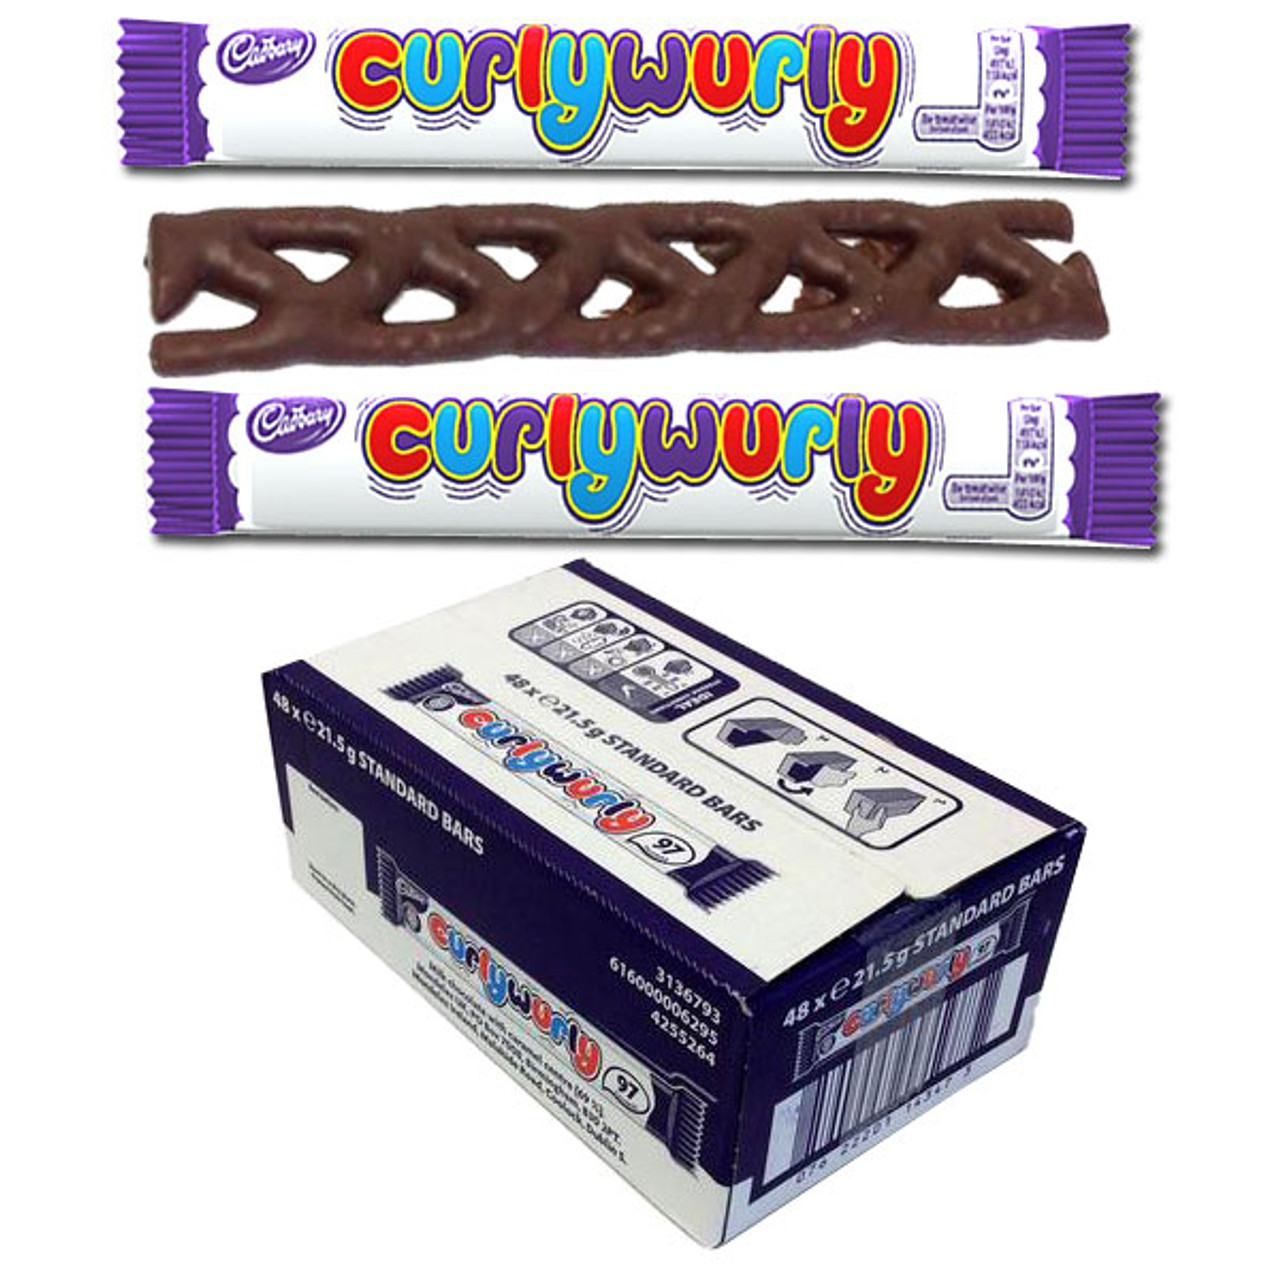 Curly Wurly (Marathon) Candy Bars 48 Count